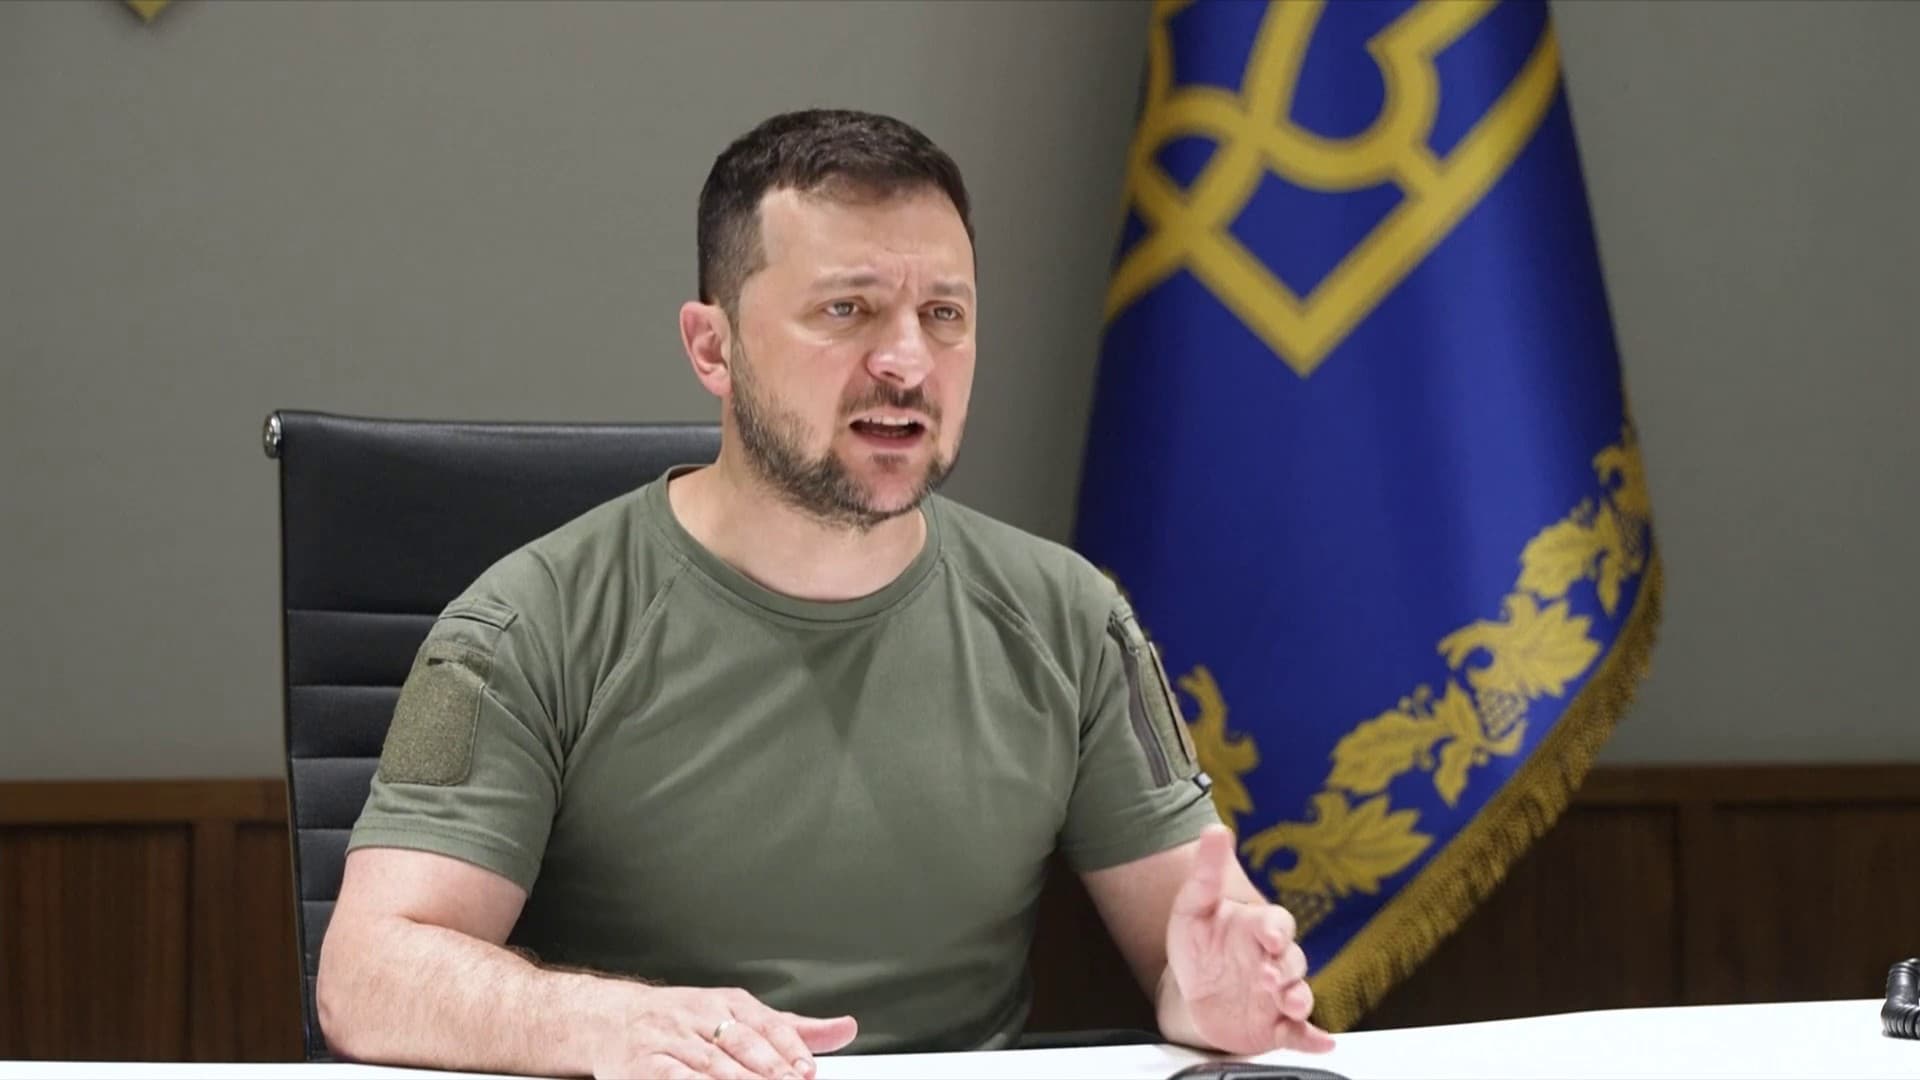 LIVE – Russian strikes in Vinnytsia: Zelensky condemns “obvious act of terrorism”